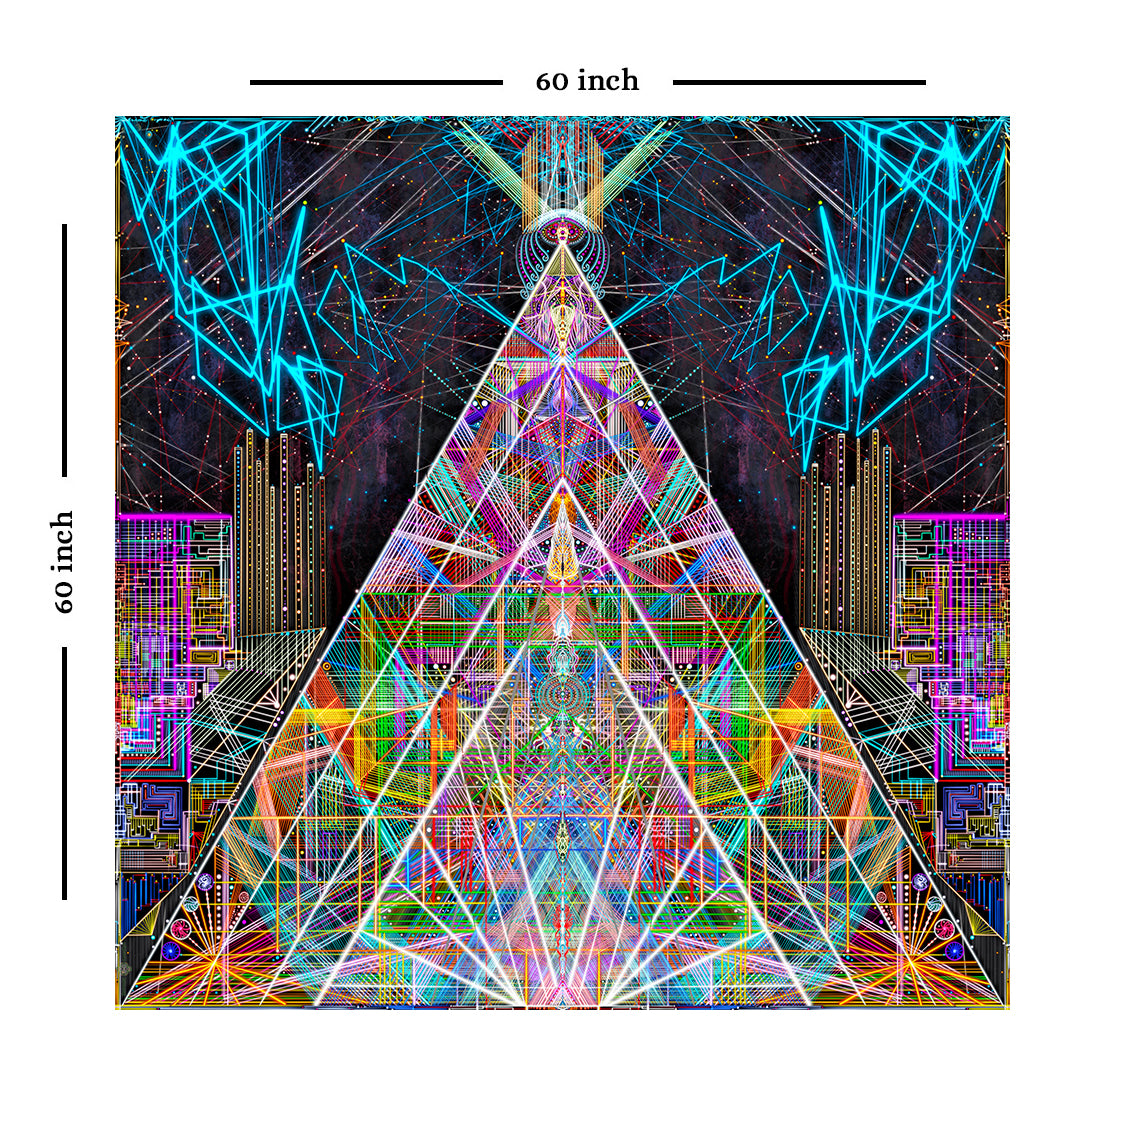 Consciousness of pyramid Wall Hanging Tapestry (Multicolour, 60 x 60 inch)